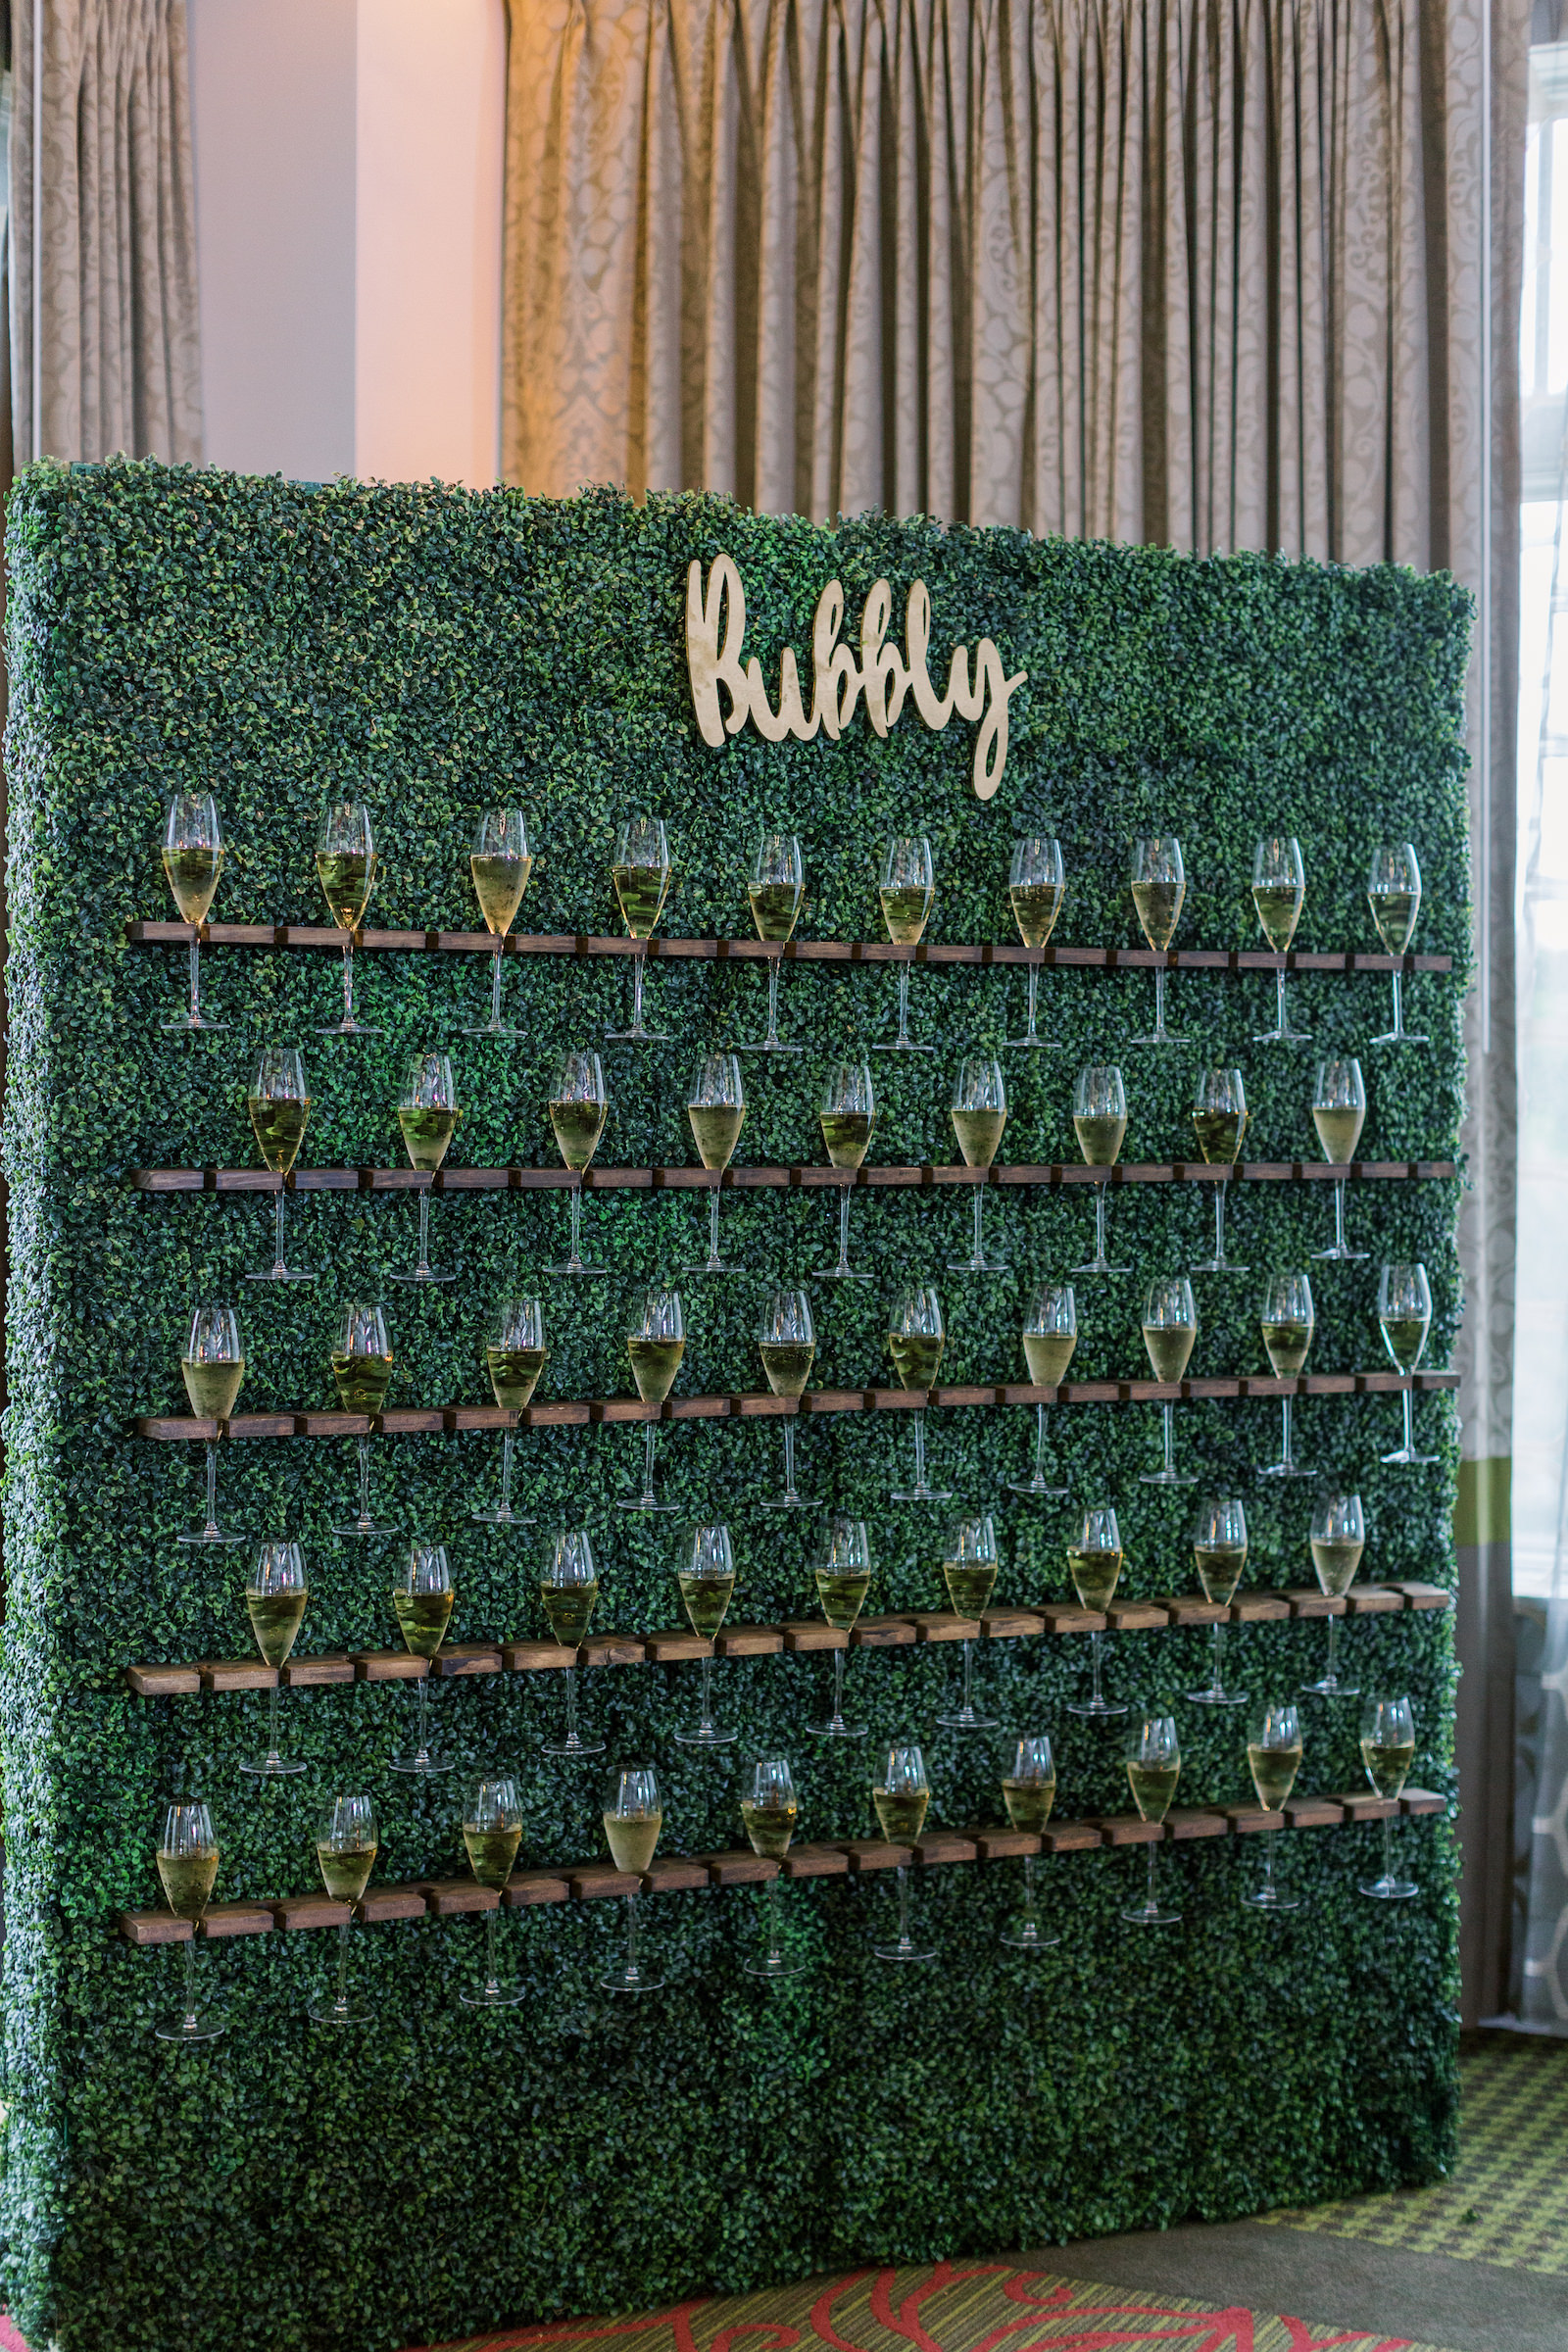 Wedding Champagne Wall Greenery Boxwood Hedge with Glasses of Bubbly by